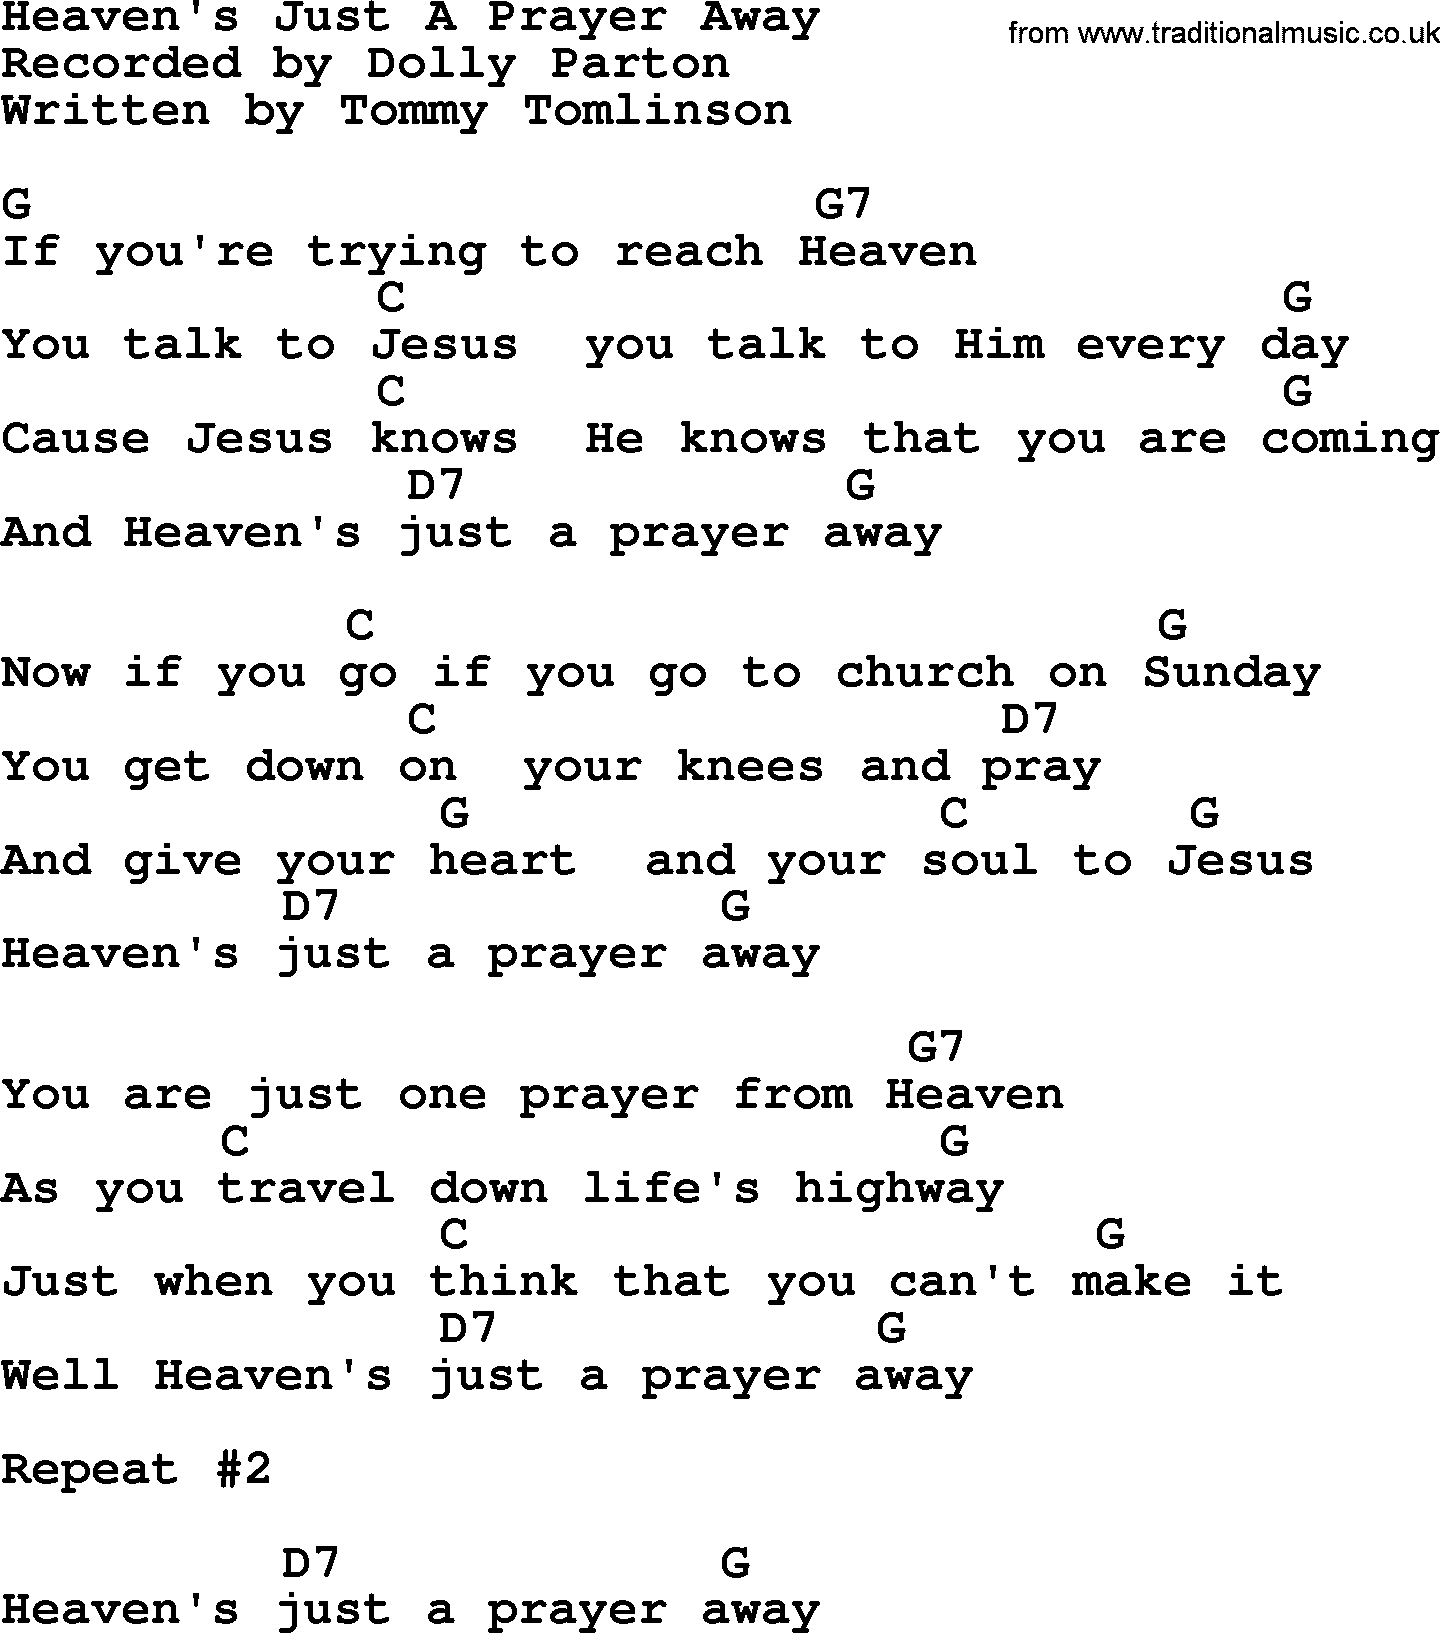 Dolly Parton song Heaven's Just A Prayer Away, lyrics and chords